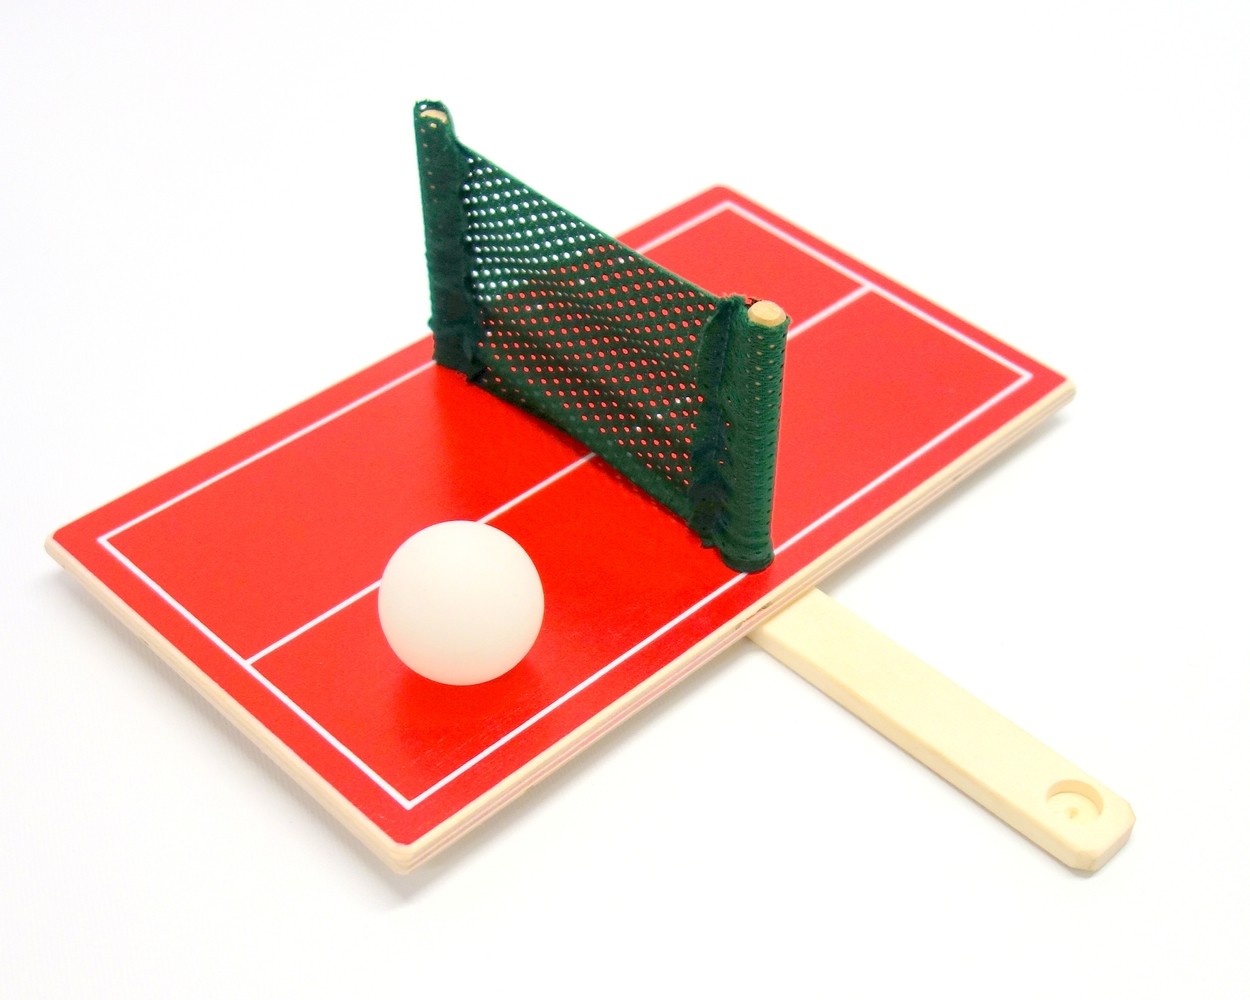 Le ping-pong solo rouge